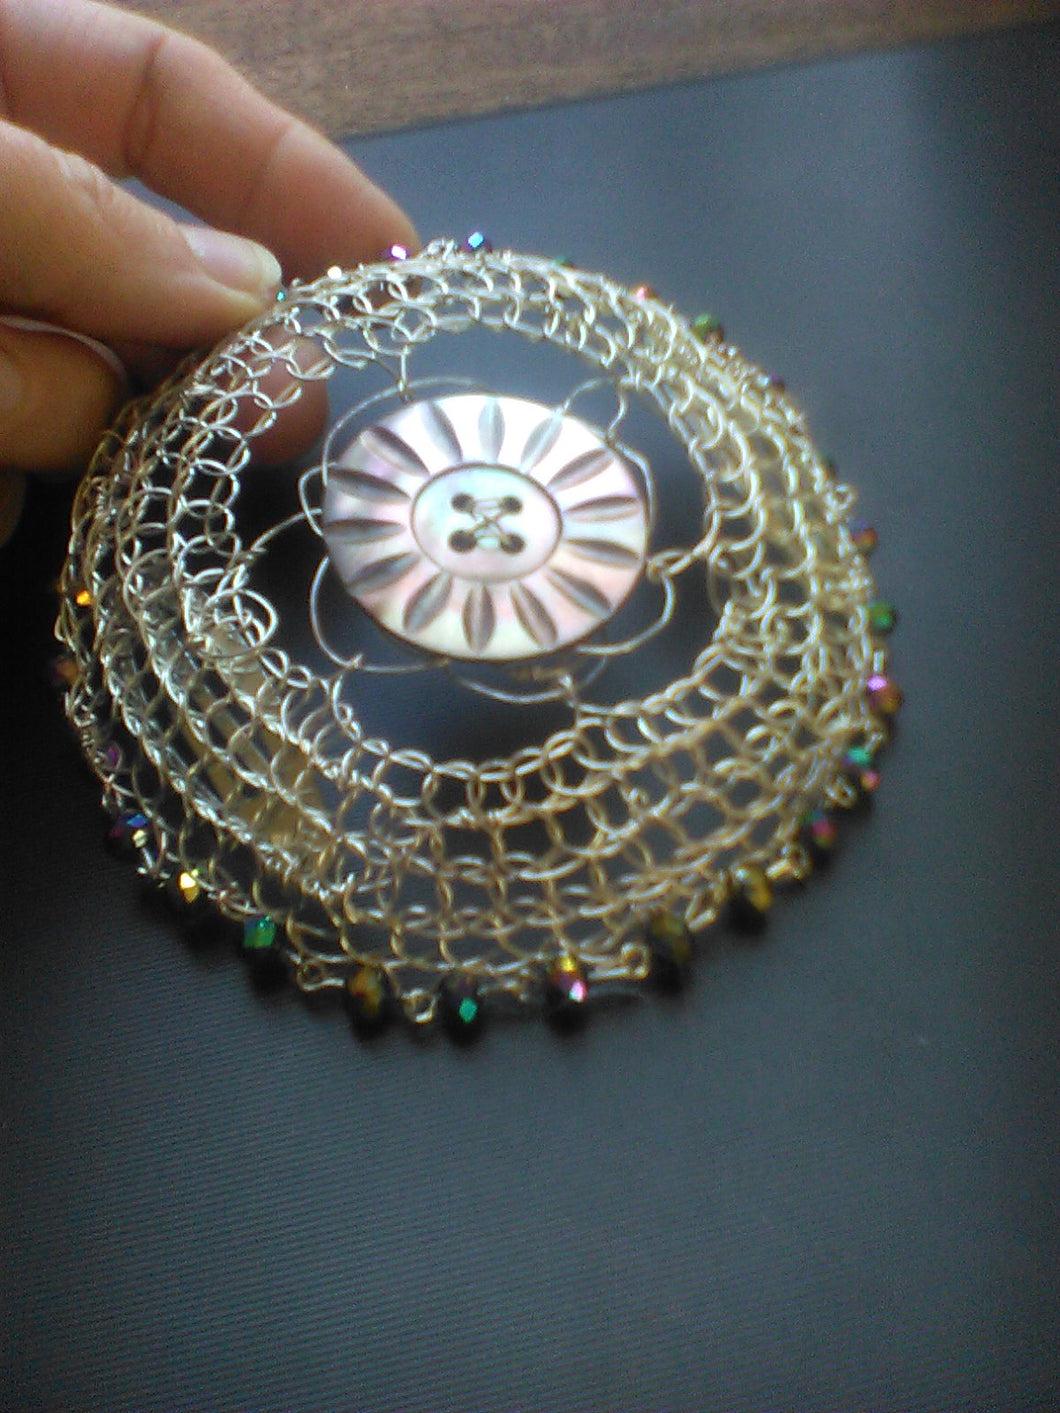 Mermaid Shimmer Kippah with vintage silver button and rainbow beads